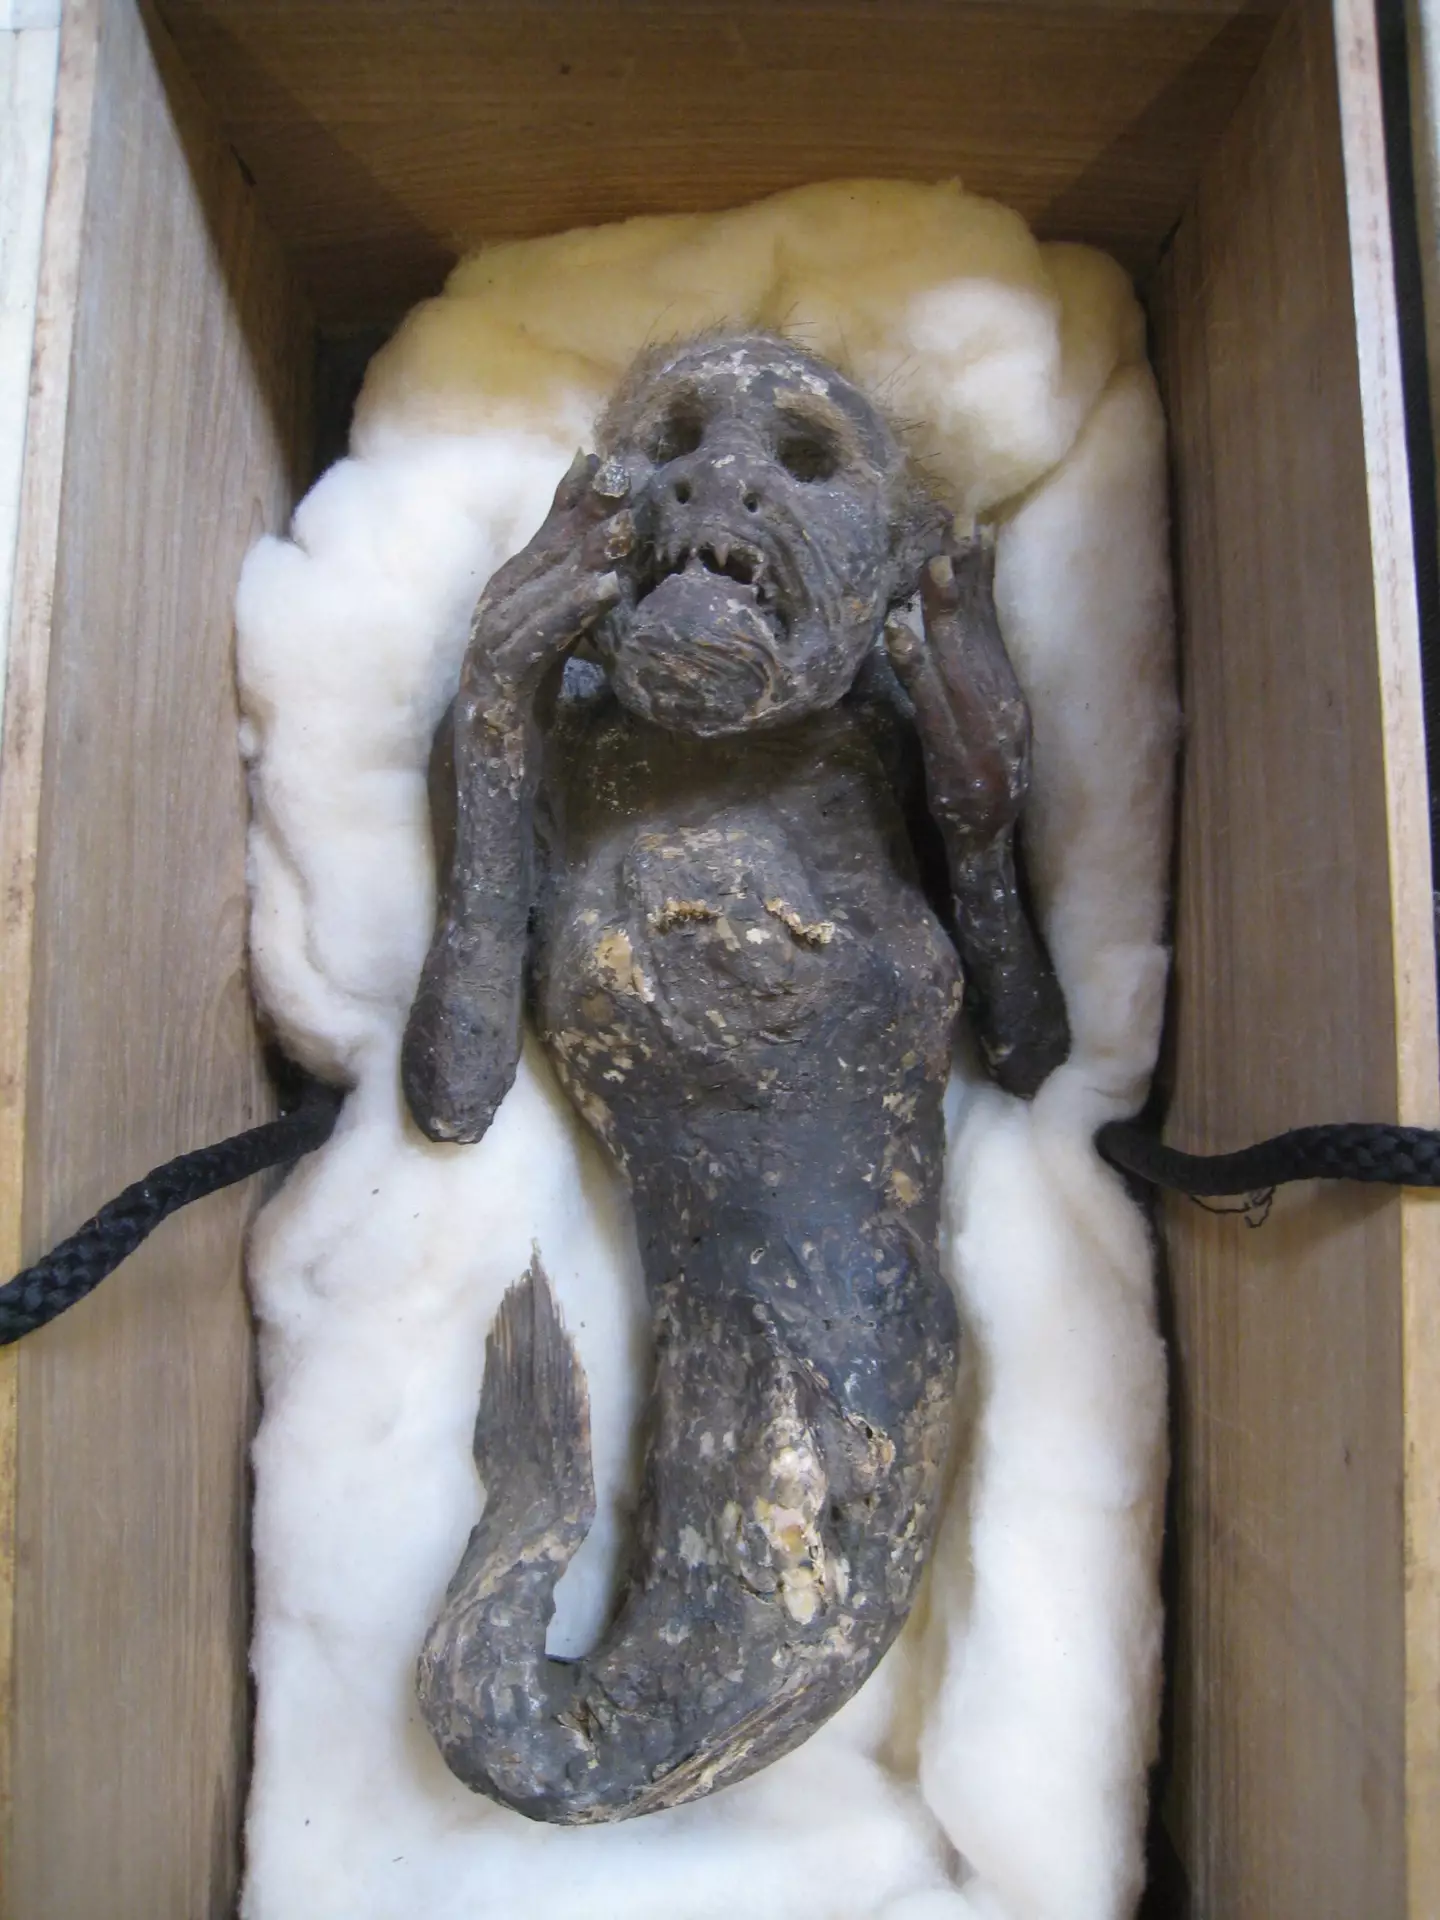 Mummified 'mermaid' to be investigated by scientists. (Pen News)